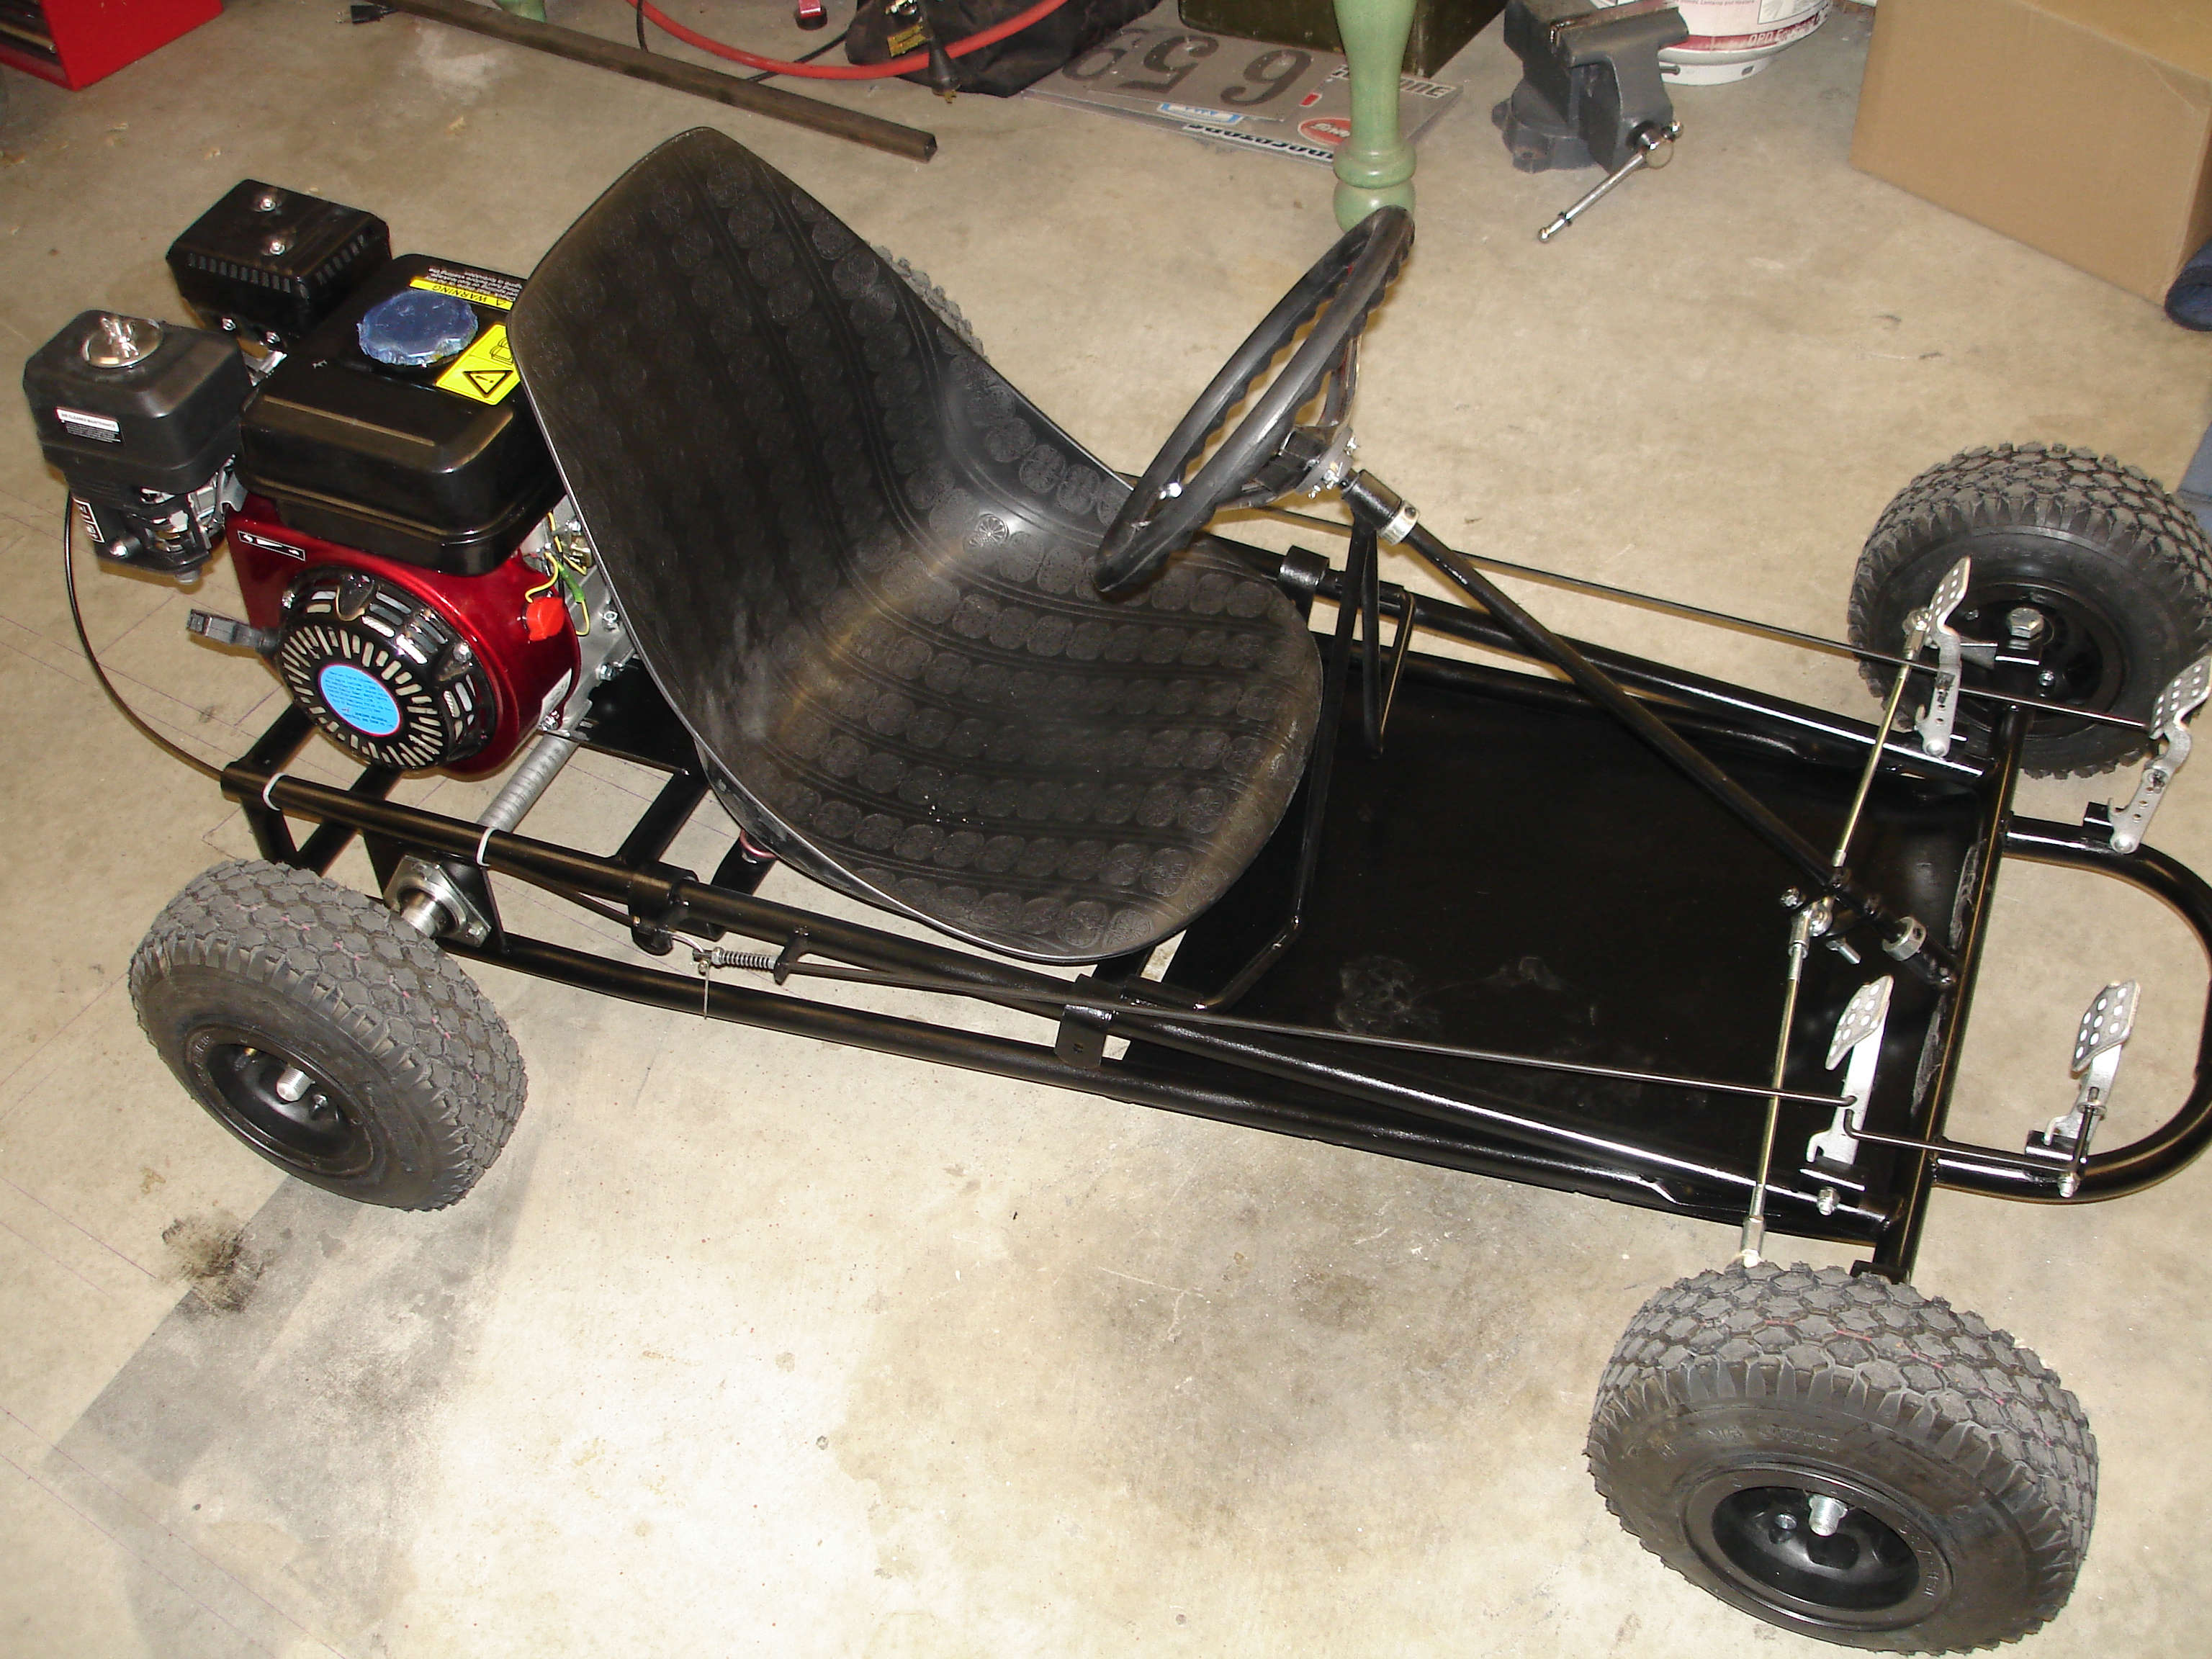 FREE DO-IT-YOURSELF GO KART PLANS